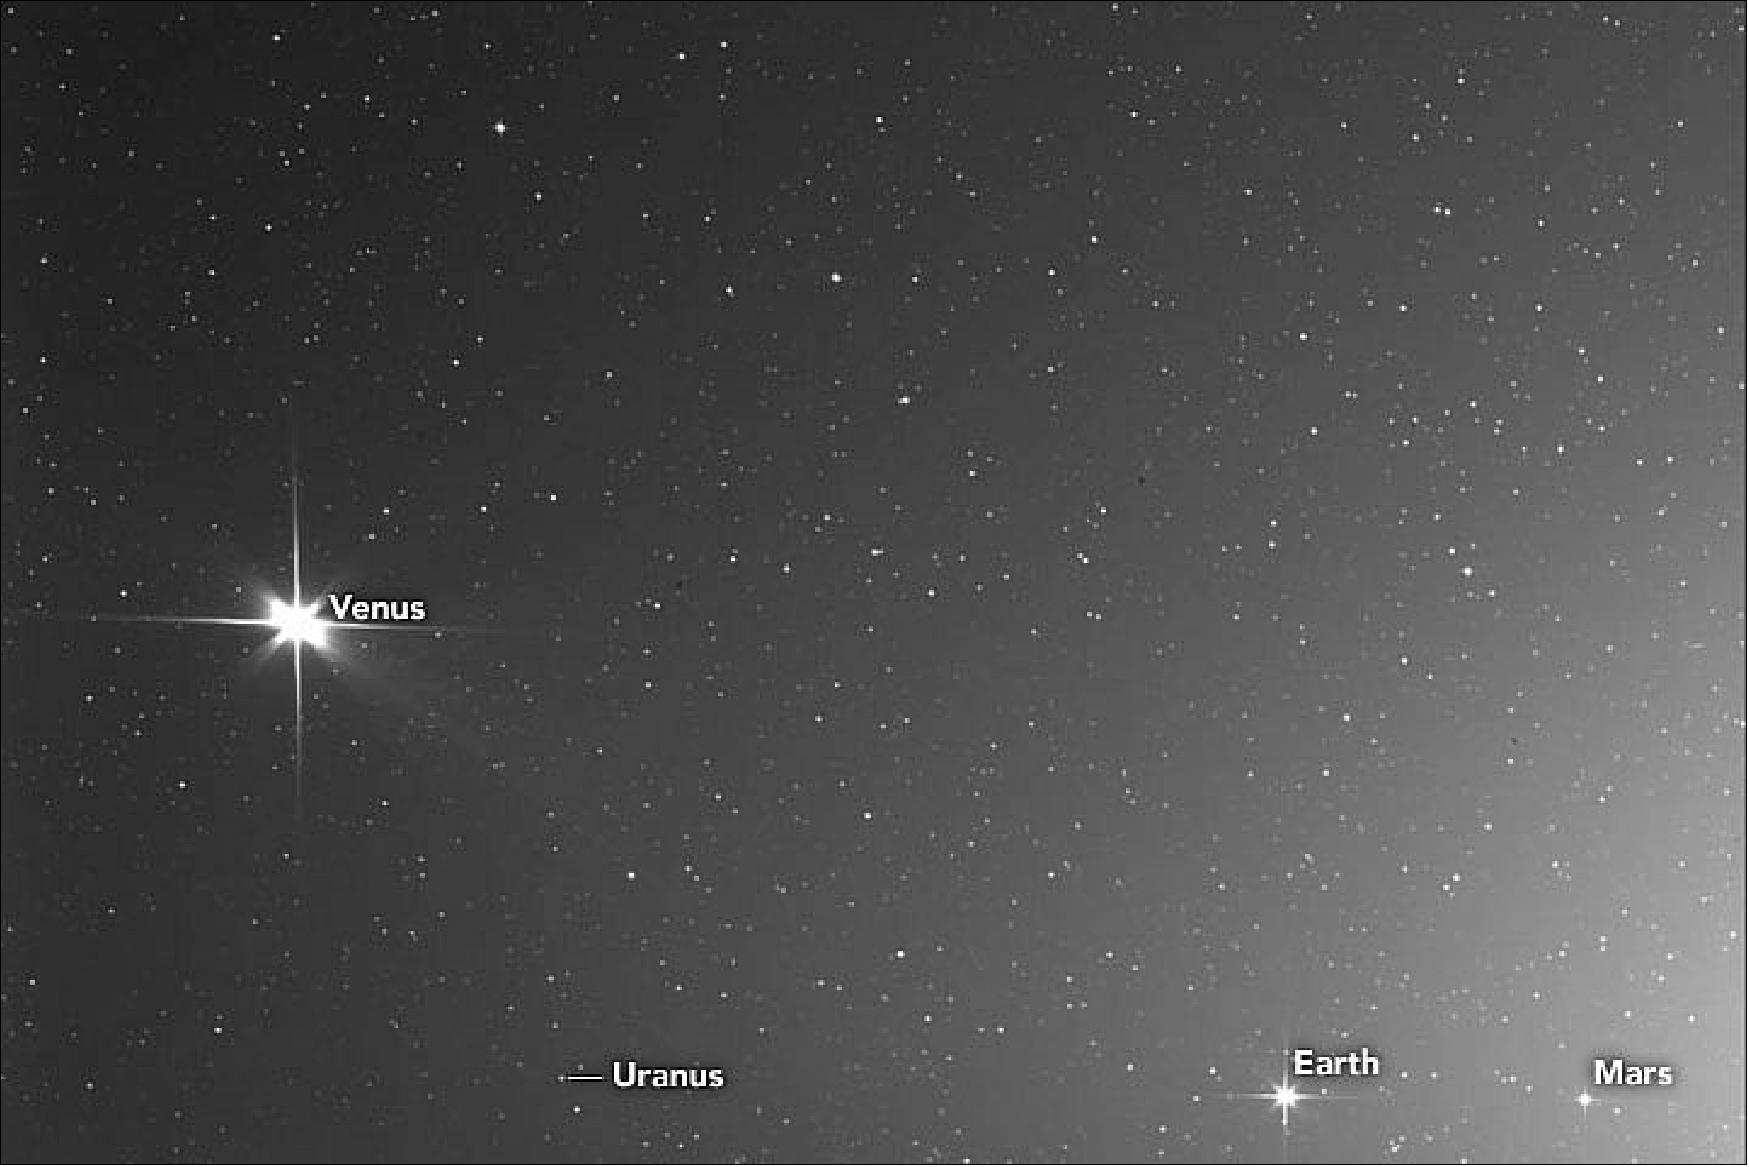 Figure 52: This image shows Venus, Uranus, Earth, and Mars as observed by the Solar Orbiter Heliospheric Imager (SoloHI) on November 18, 2020. The spacecraft was about 251 million kilometers (156 million miles) away from Earth at the time; the Sun was outside the image frame to the right. To understand the placement of the planets in the image, view this depiction of the spacecraft viewing angle. (image credit: NASA Earth Observatory. Images courtesy of ESA/NASA/NRL/Solar Orbiter/SolOHI and Johns Hopkins APL/Naval Research Laboratory/Guillermo Stenborg and Brendan Gallagher. Story by Sarah Frazier and Miles Hatfield, NASA GSFC, and Michael Buckley, Johns Hopkins APL)